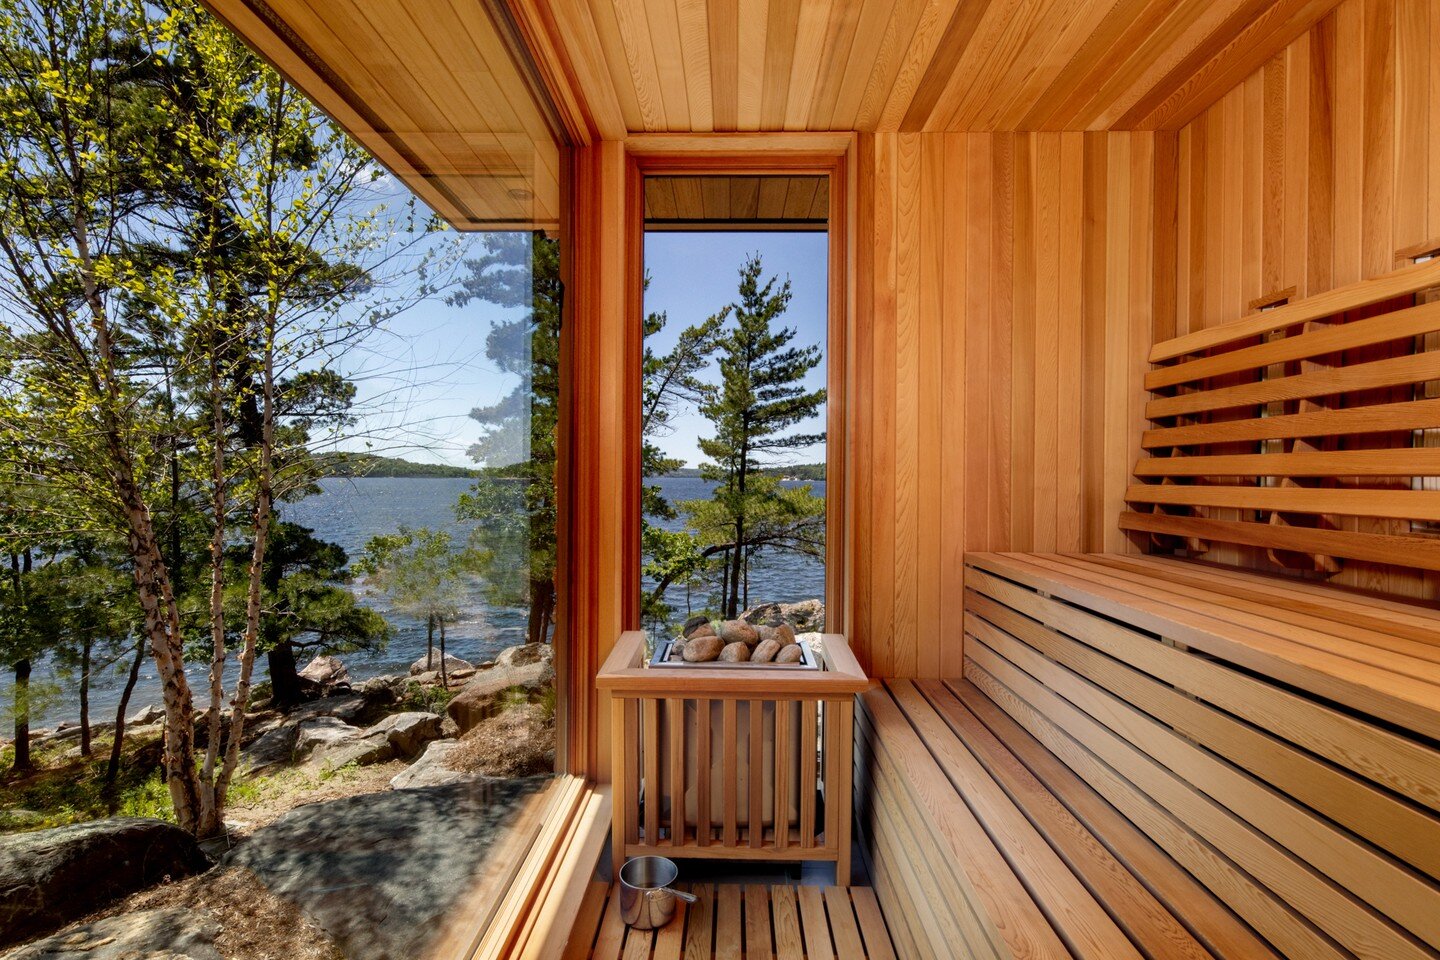 Now that's a sauna with a view of beautiful Georgian Bay on this island retreat. 
.
.
Builder: @tamaracknorthltd